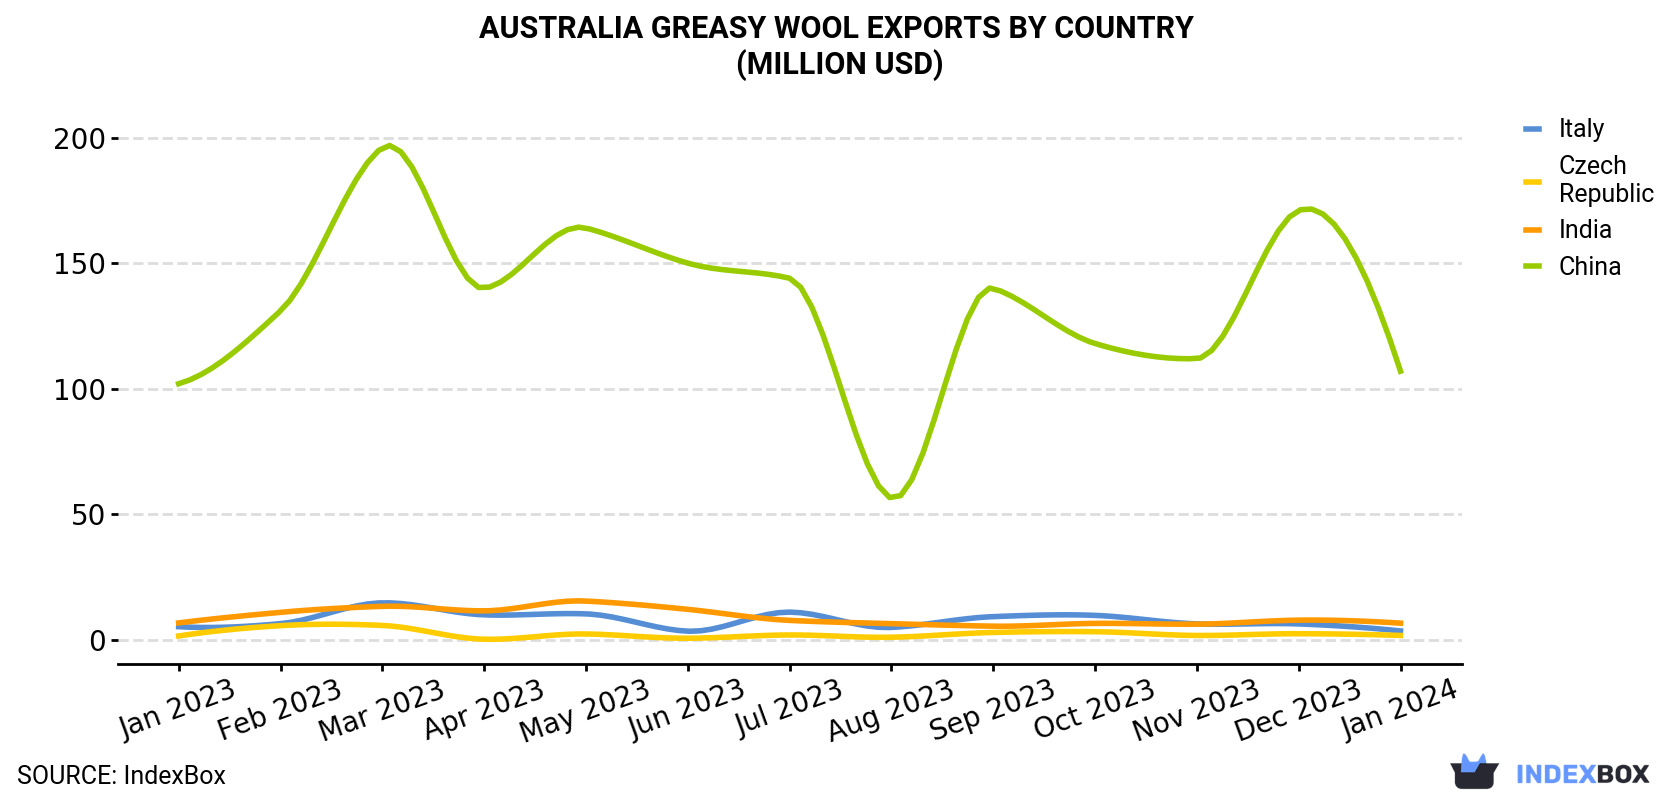 Australia Greasy Wool Exports By Country (Million USD)